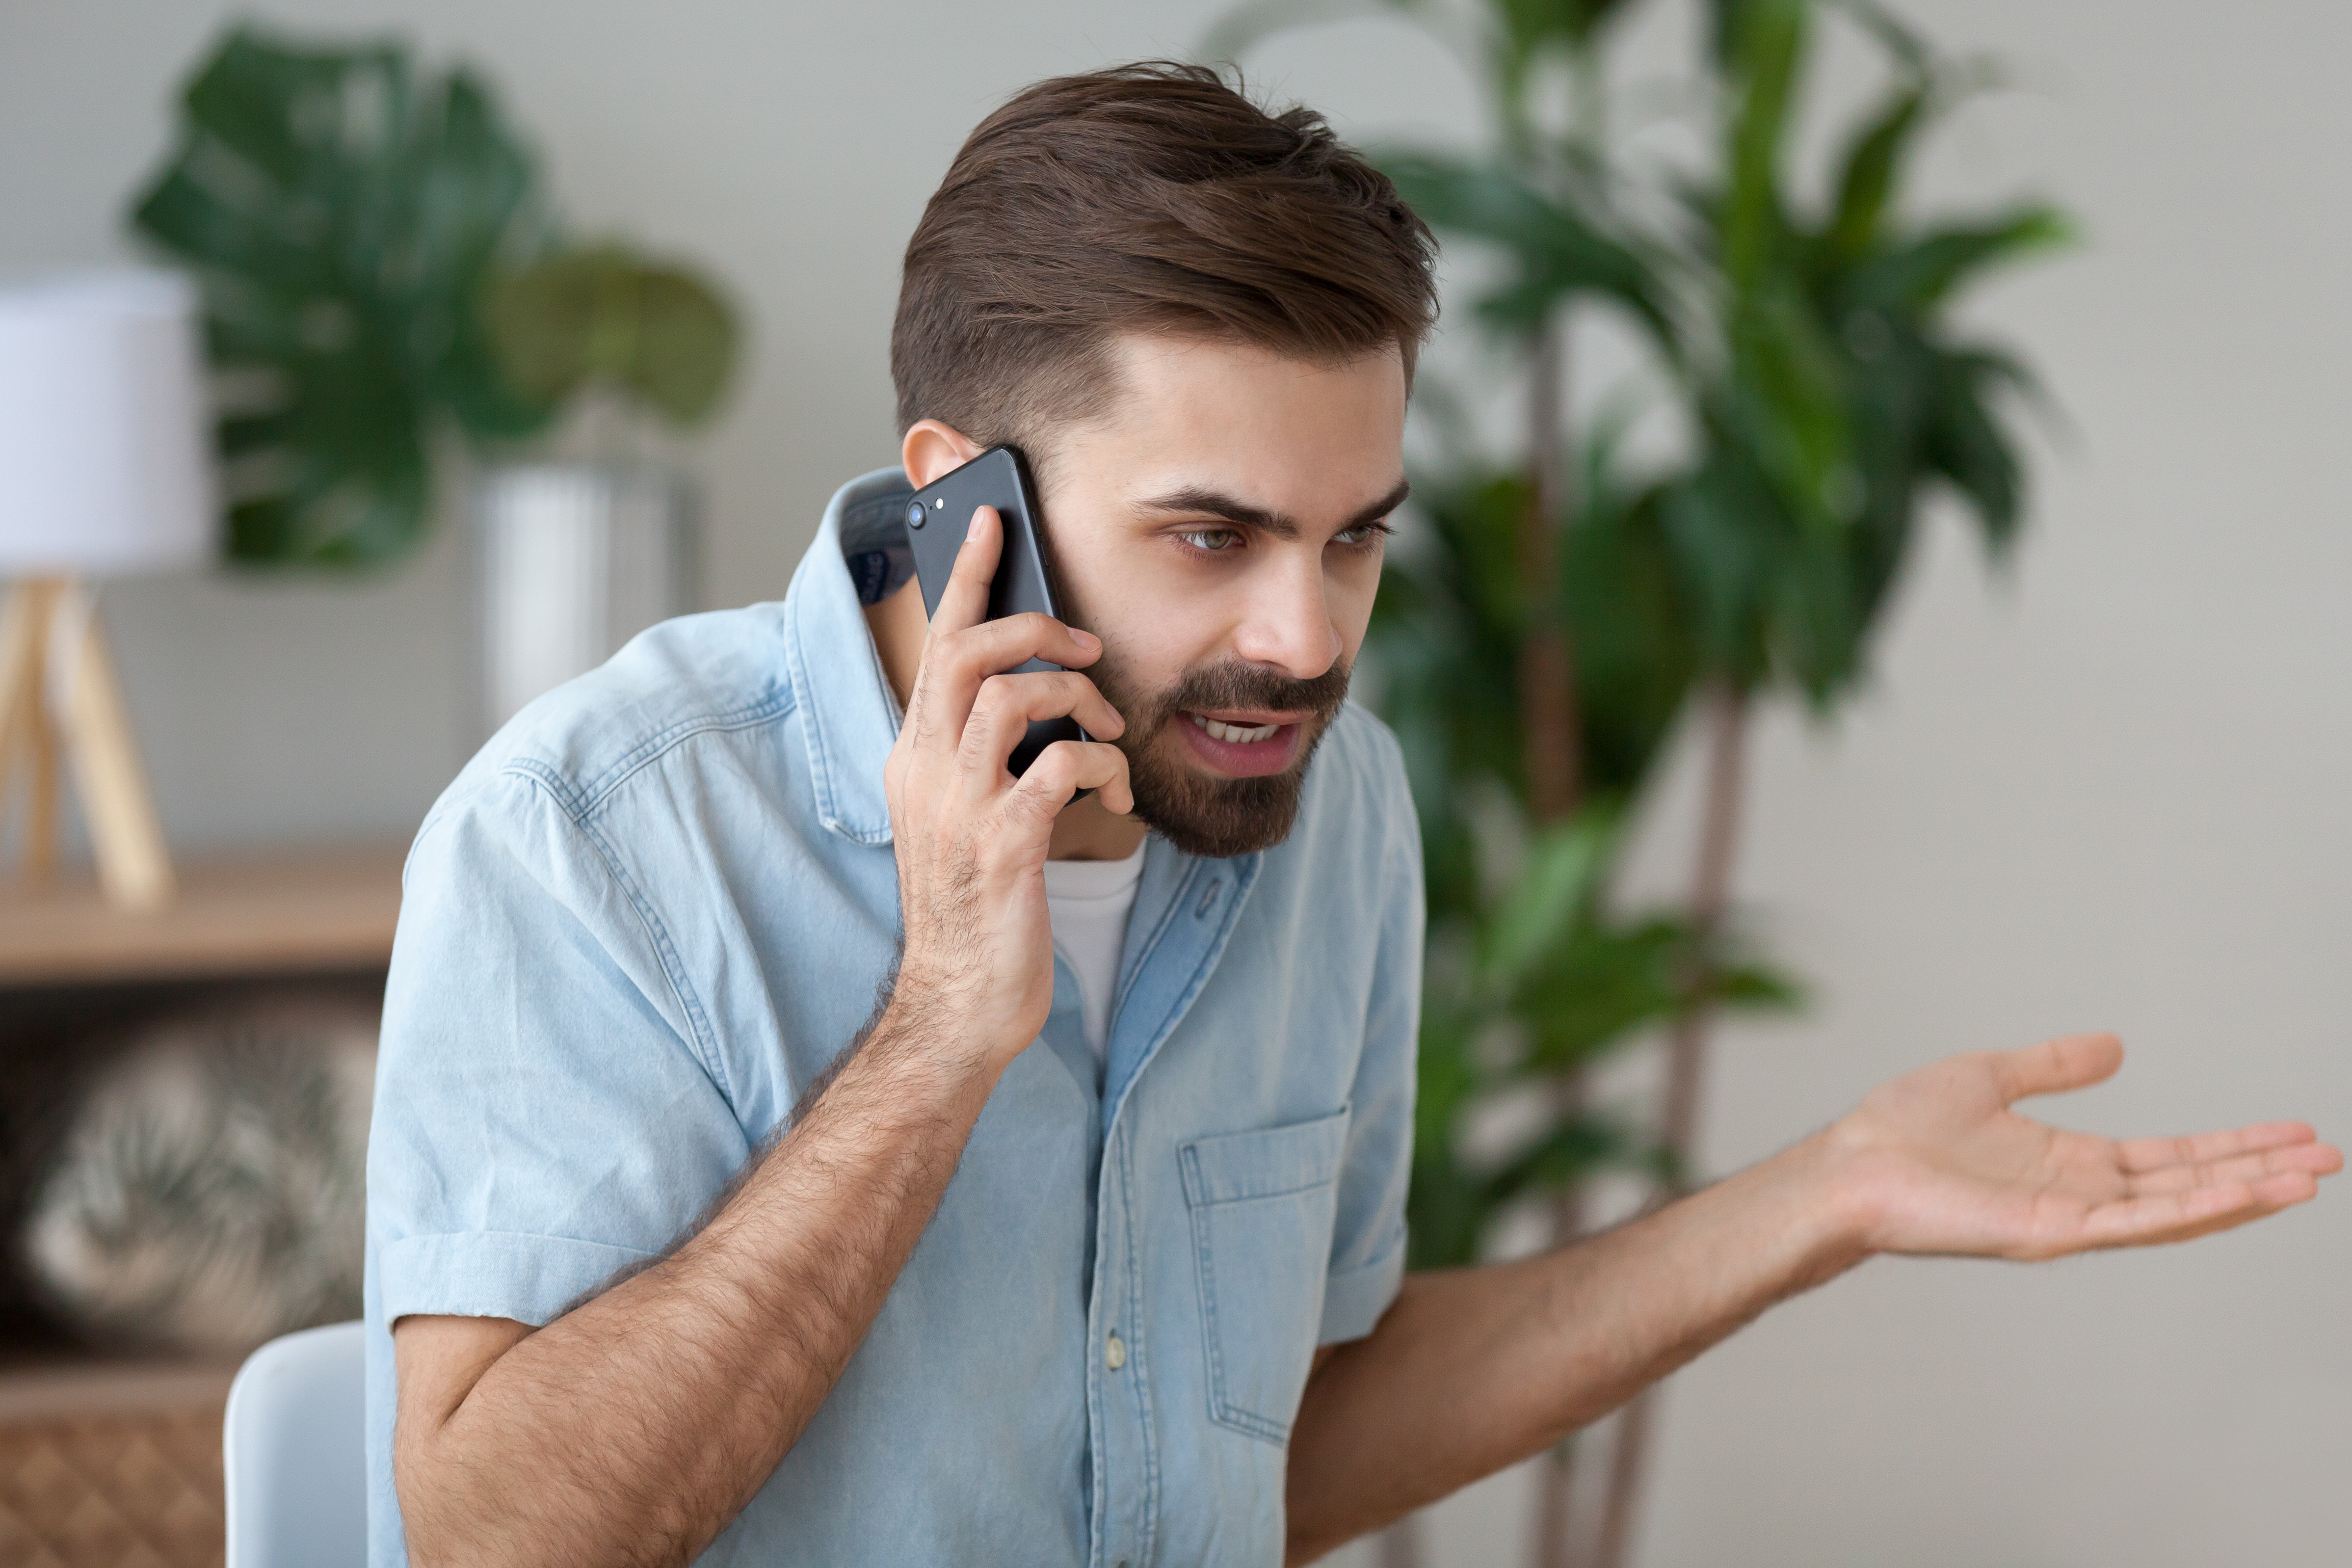 A man shouting on the phone | Source: Shutterstock